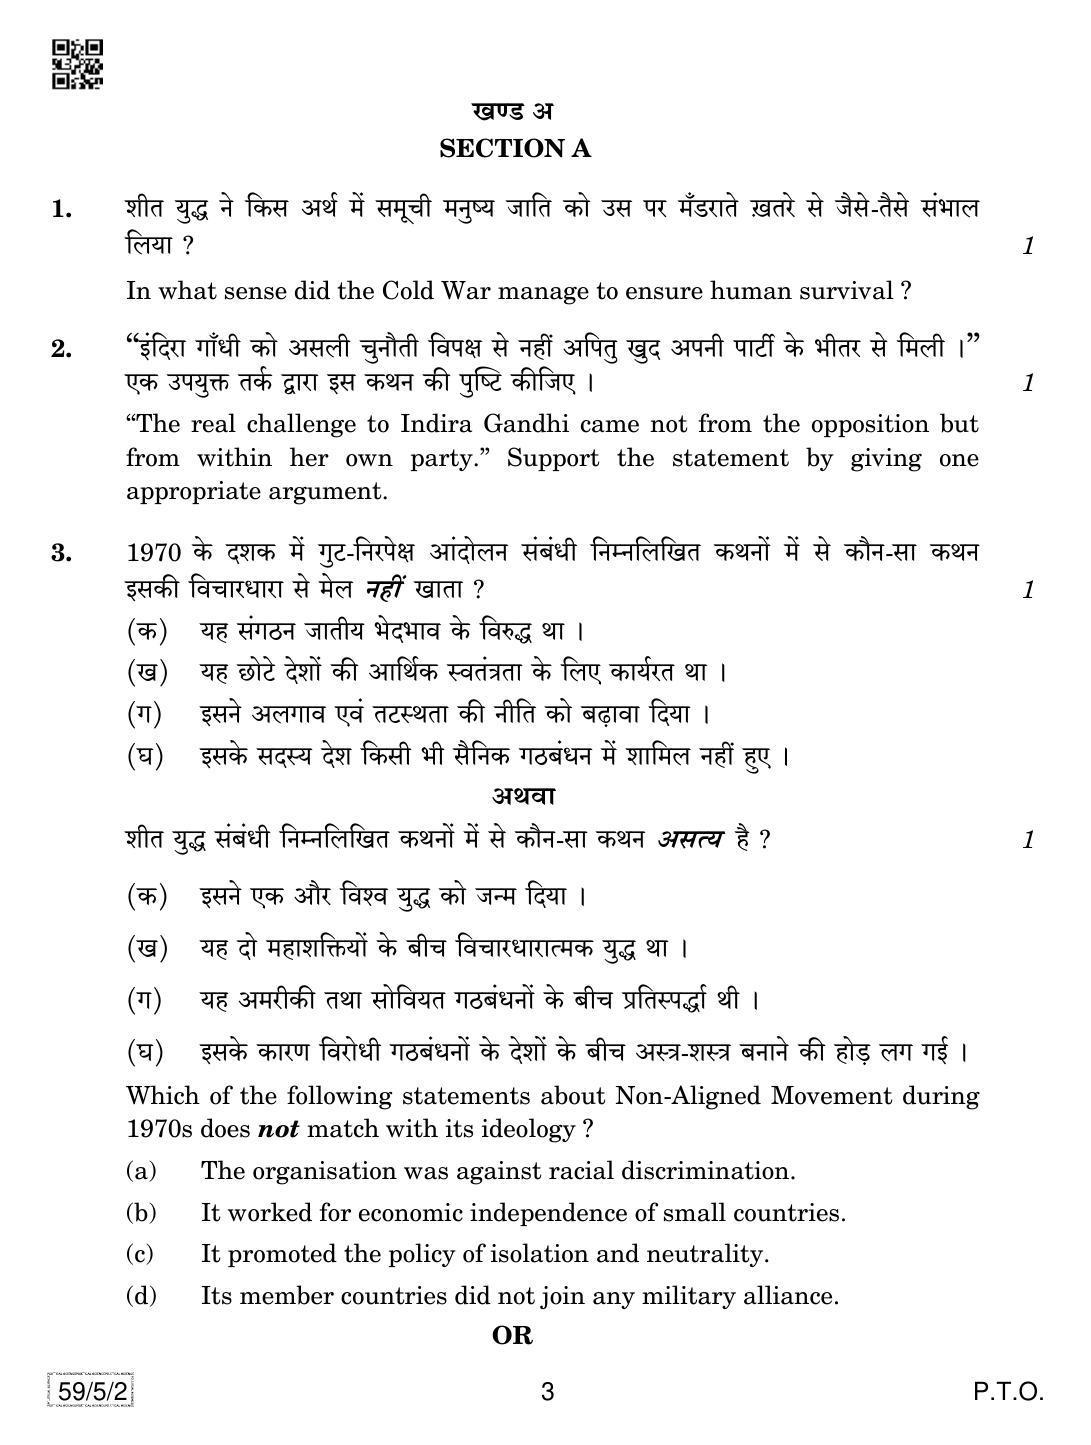 CBSE Class 12 59-5-2 Political Science 2019 Question Paper - Page 3